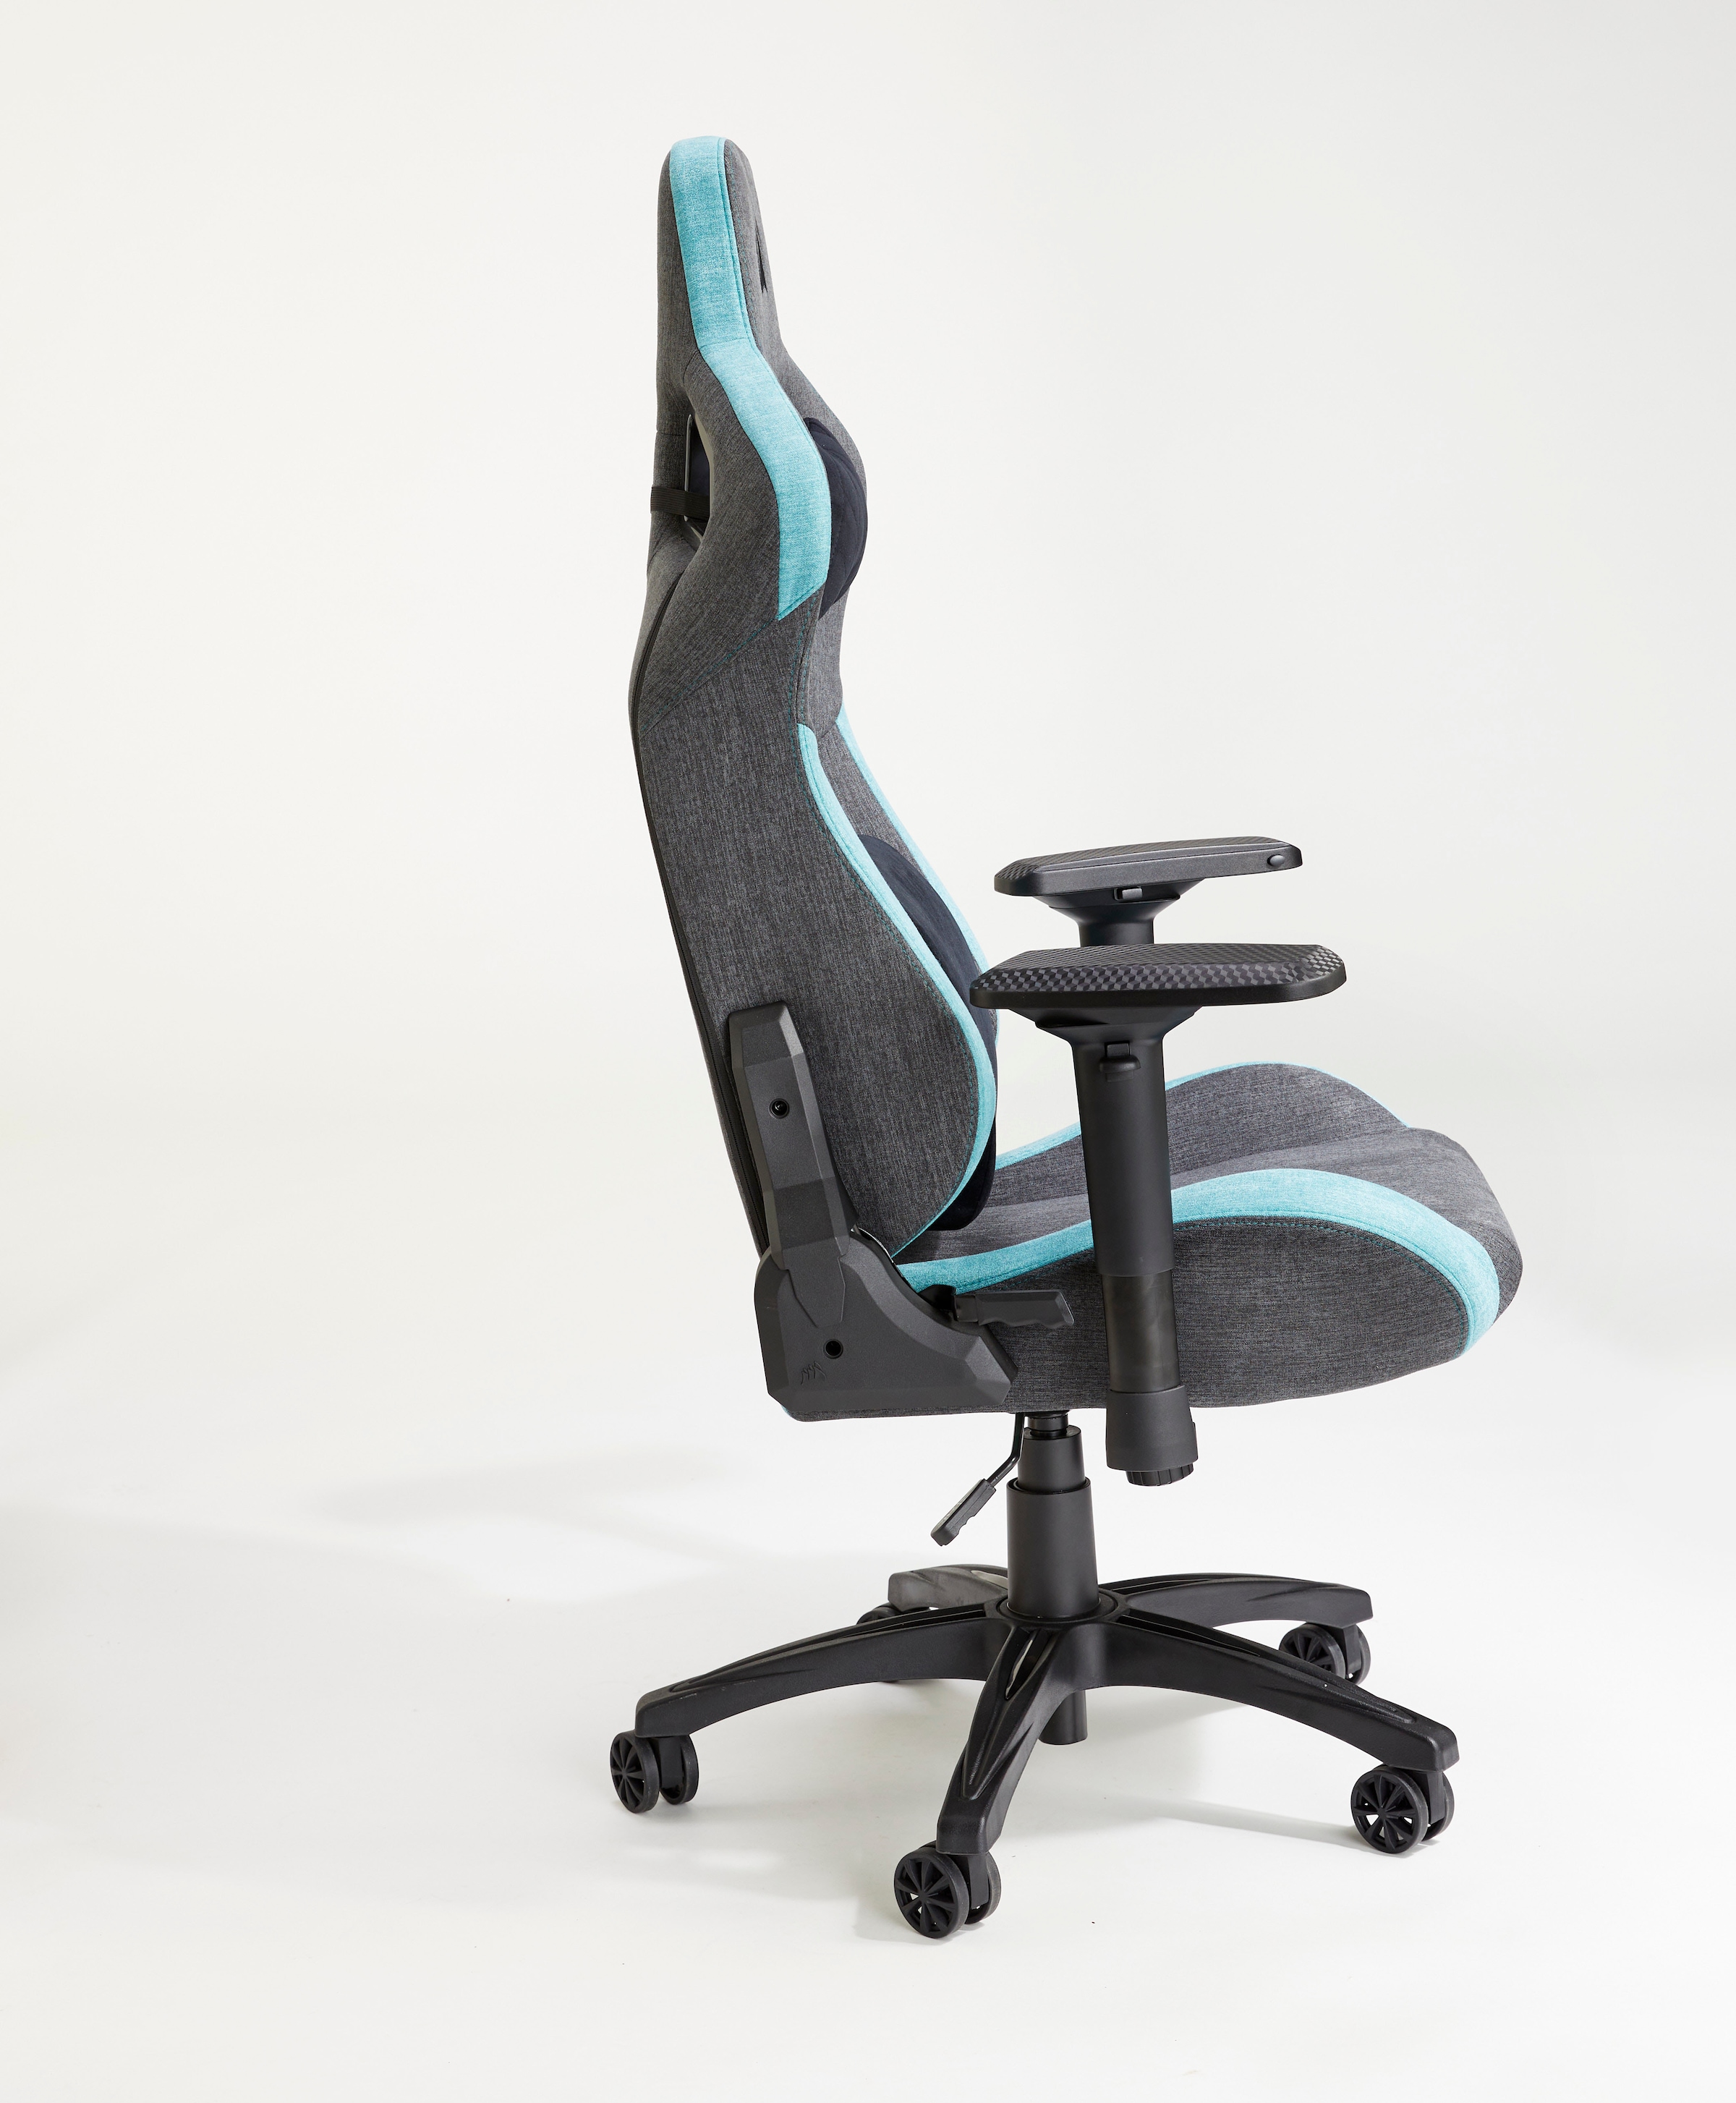 Corsair Gaming Chair Racing-Inspired Fabric bei Soft »T3 Chair«, Rush UNIVERSAL Exterior Fabric Gaming Design, online